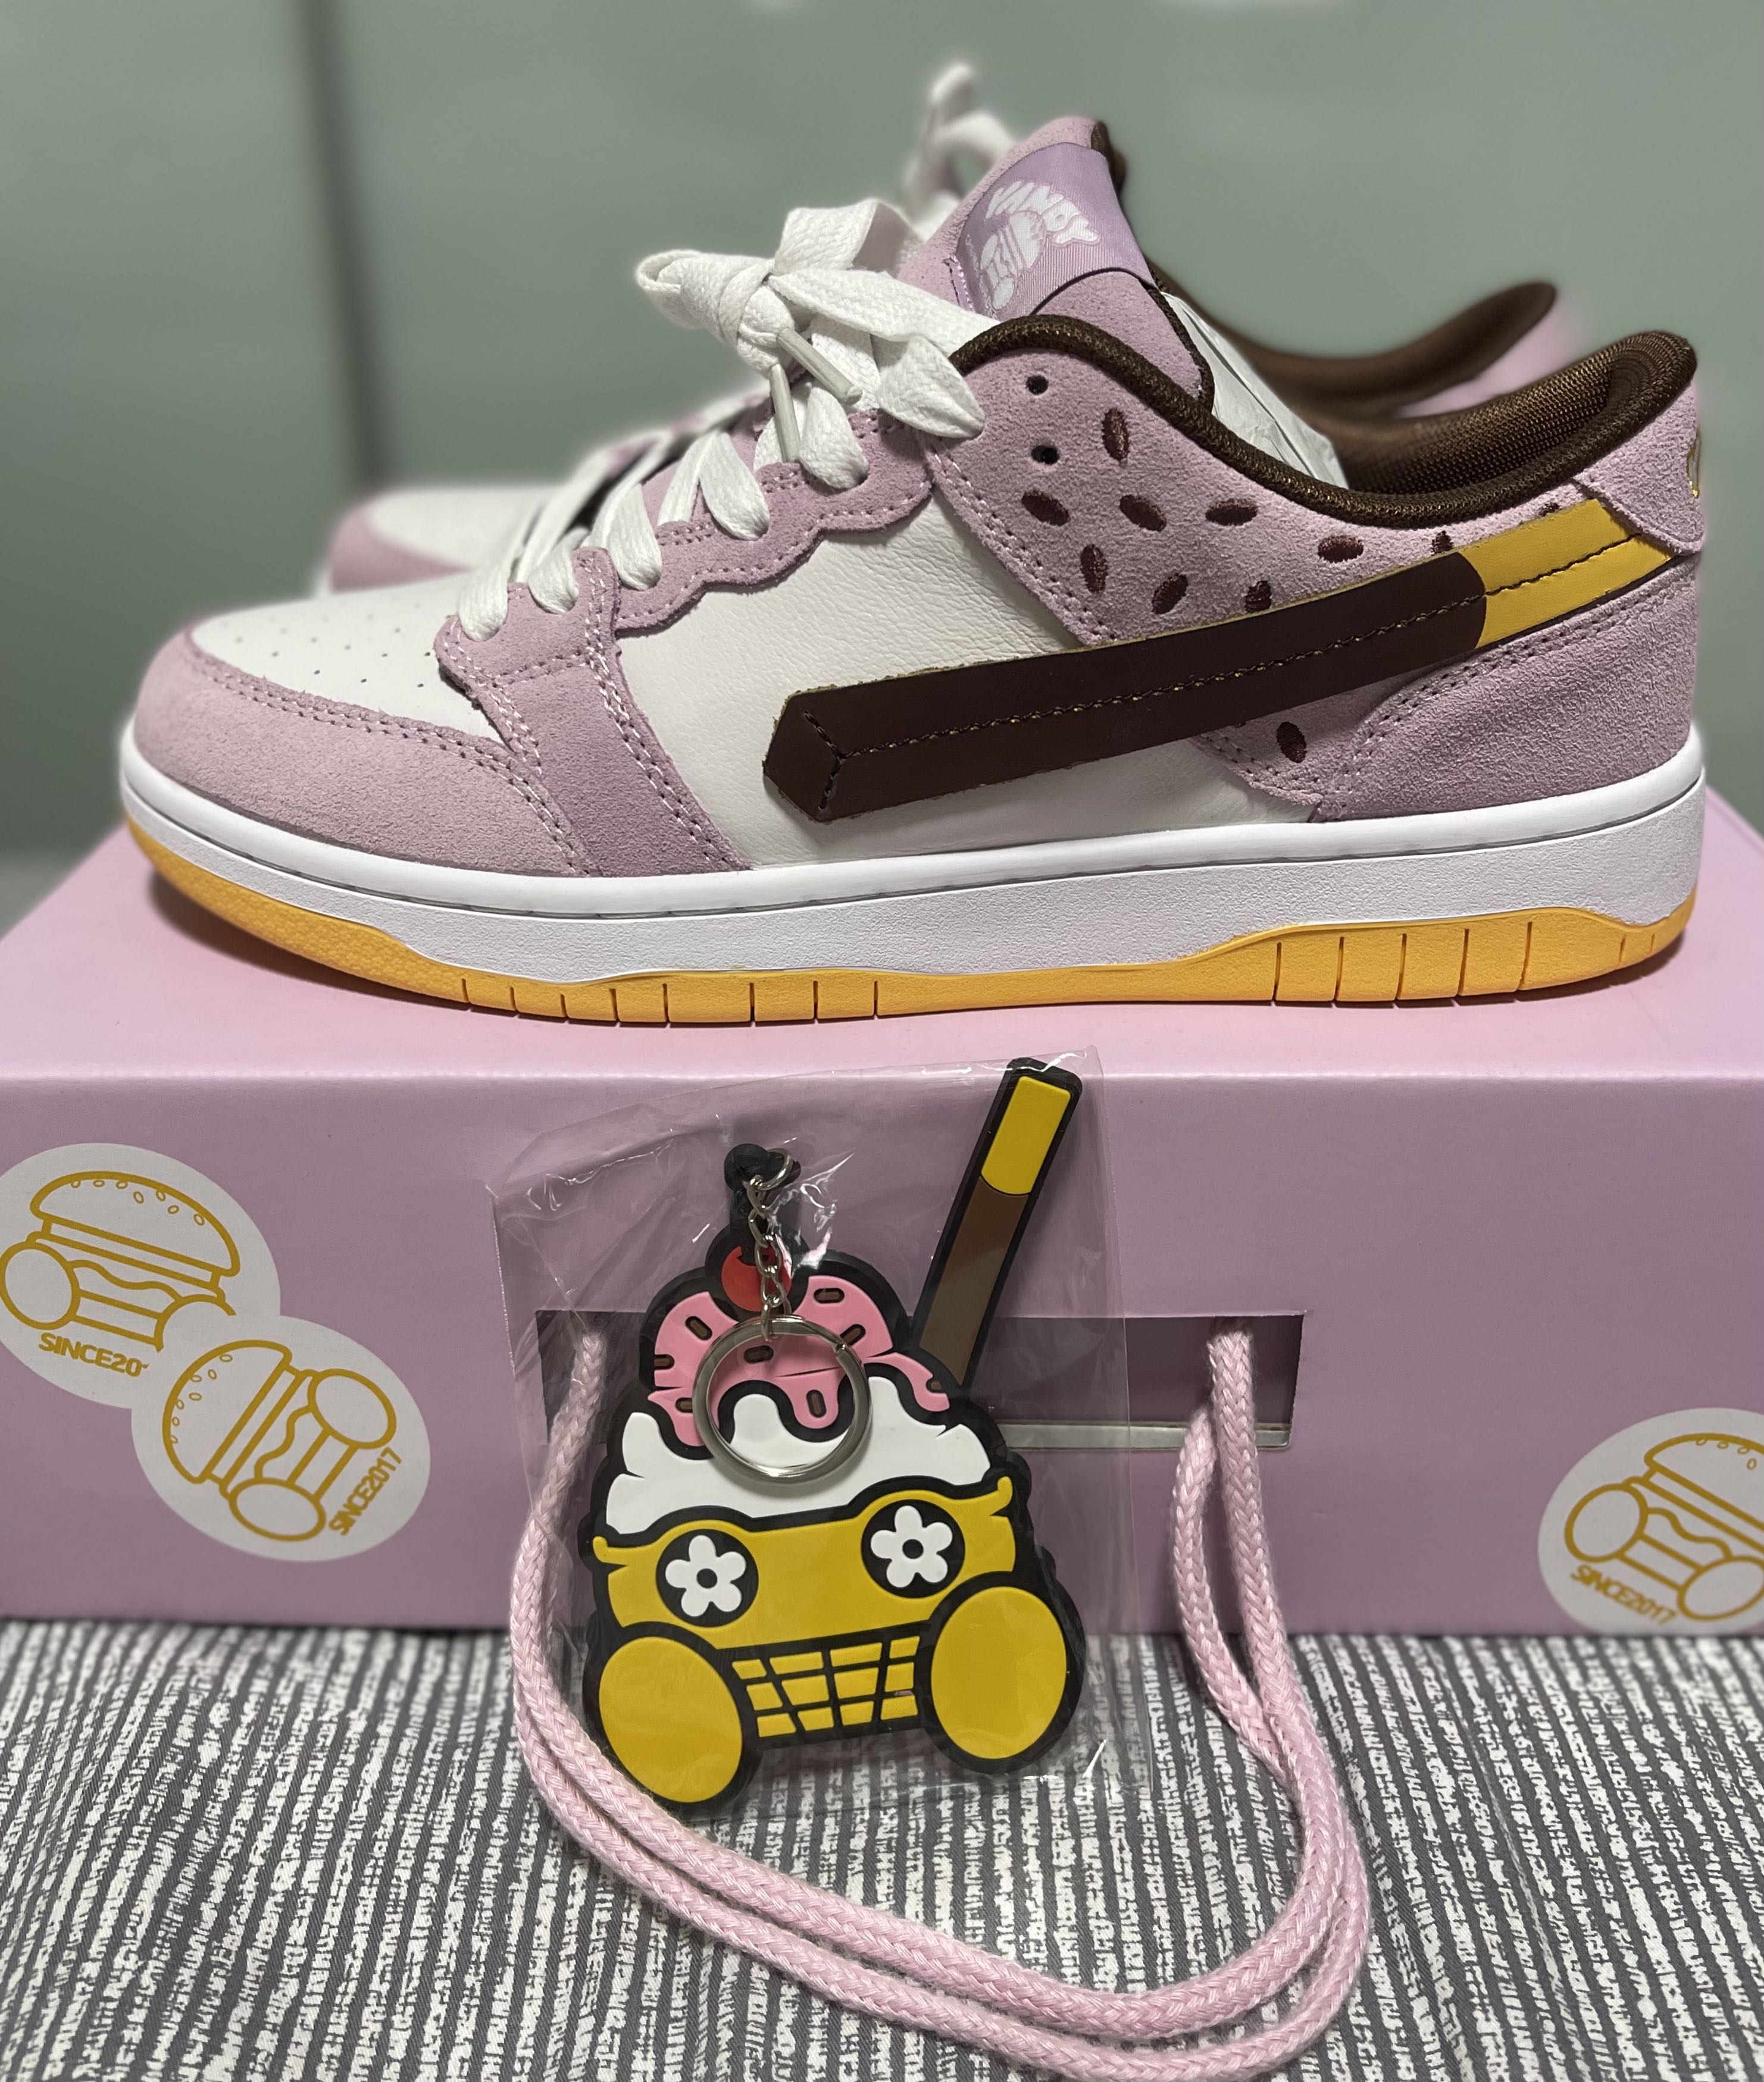 Vandy the Pink x HBX Exclusive Collection Info